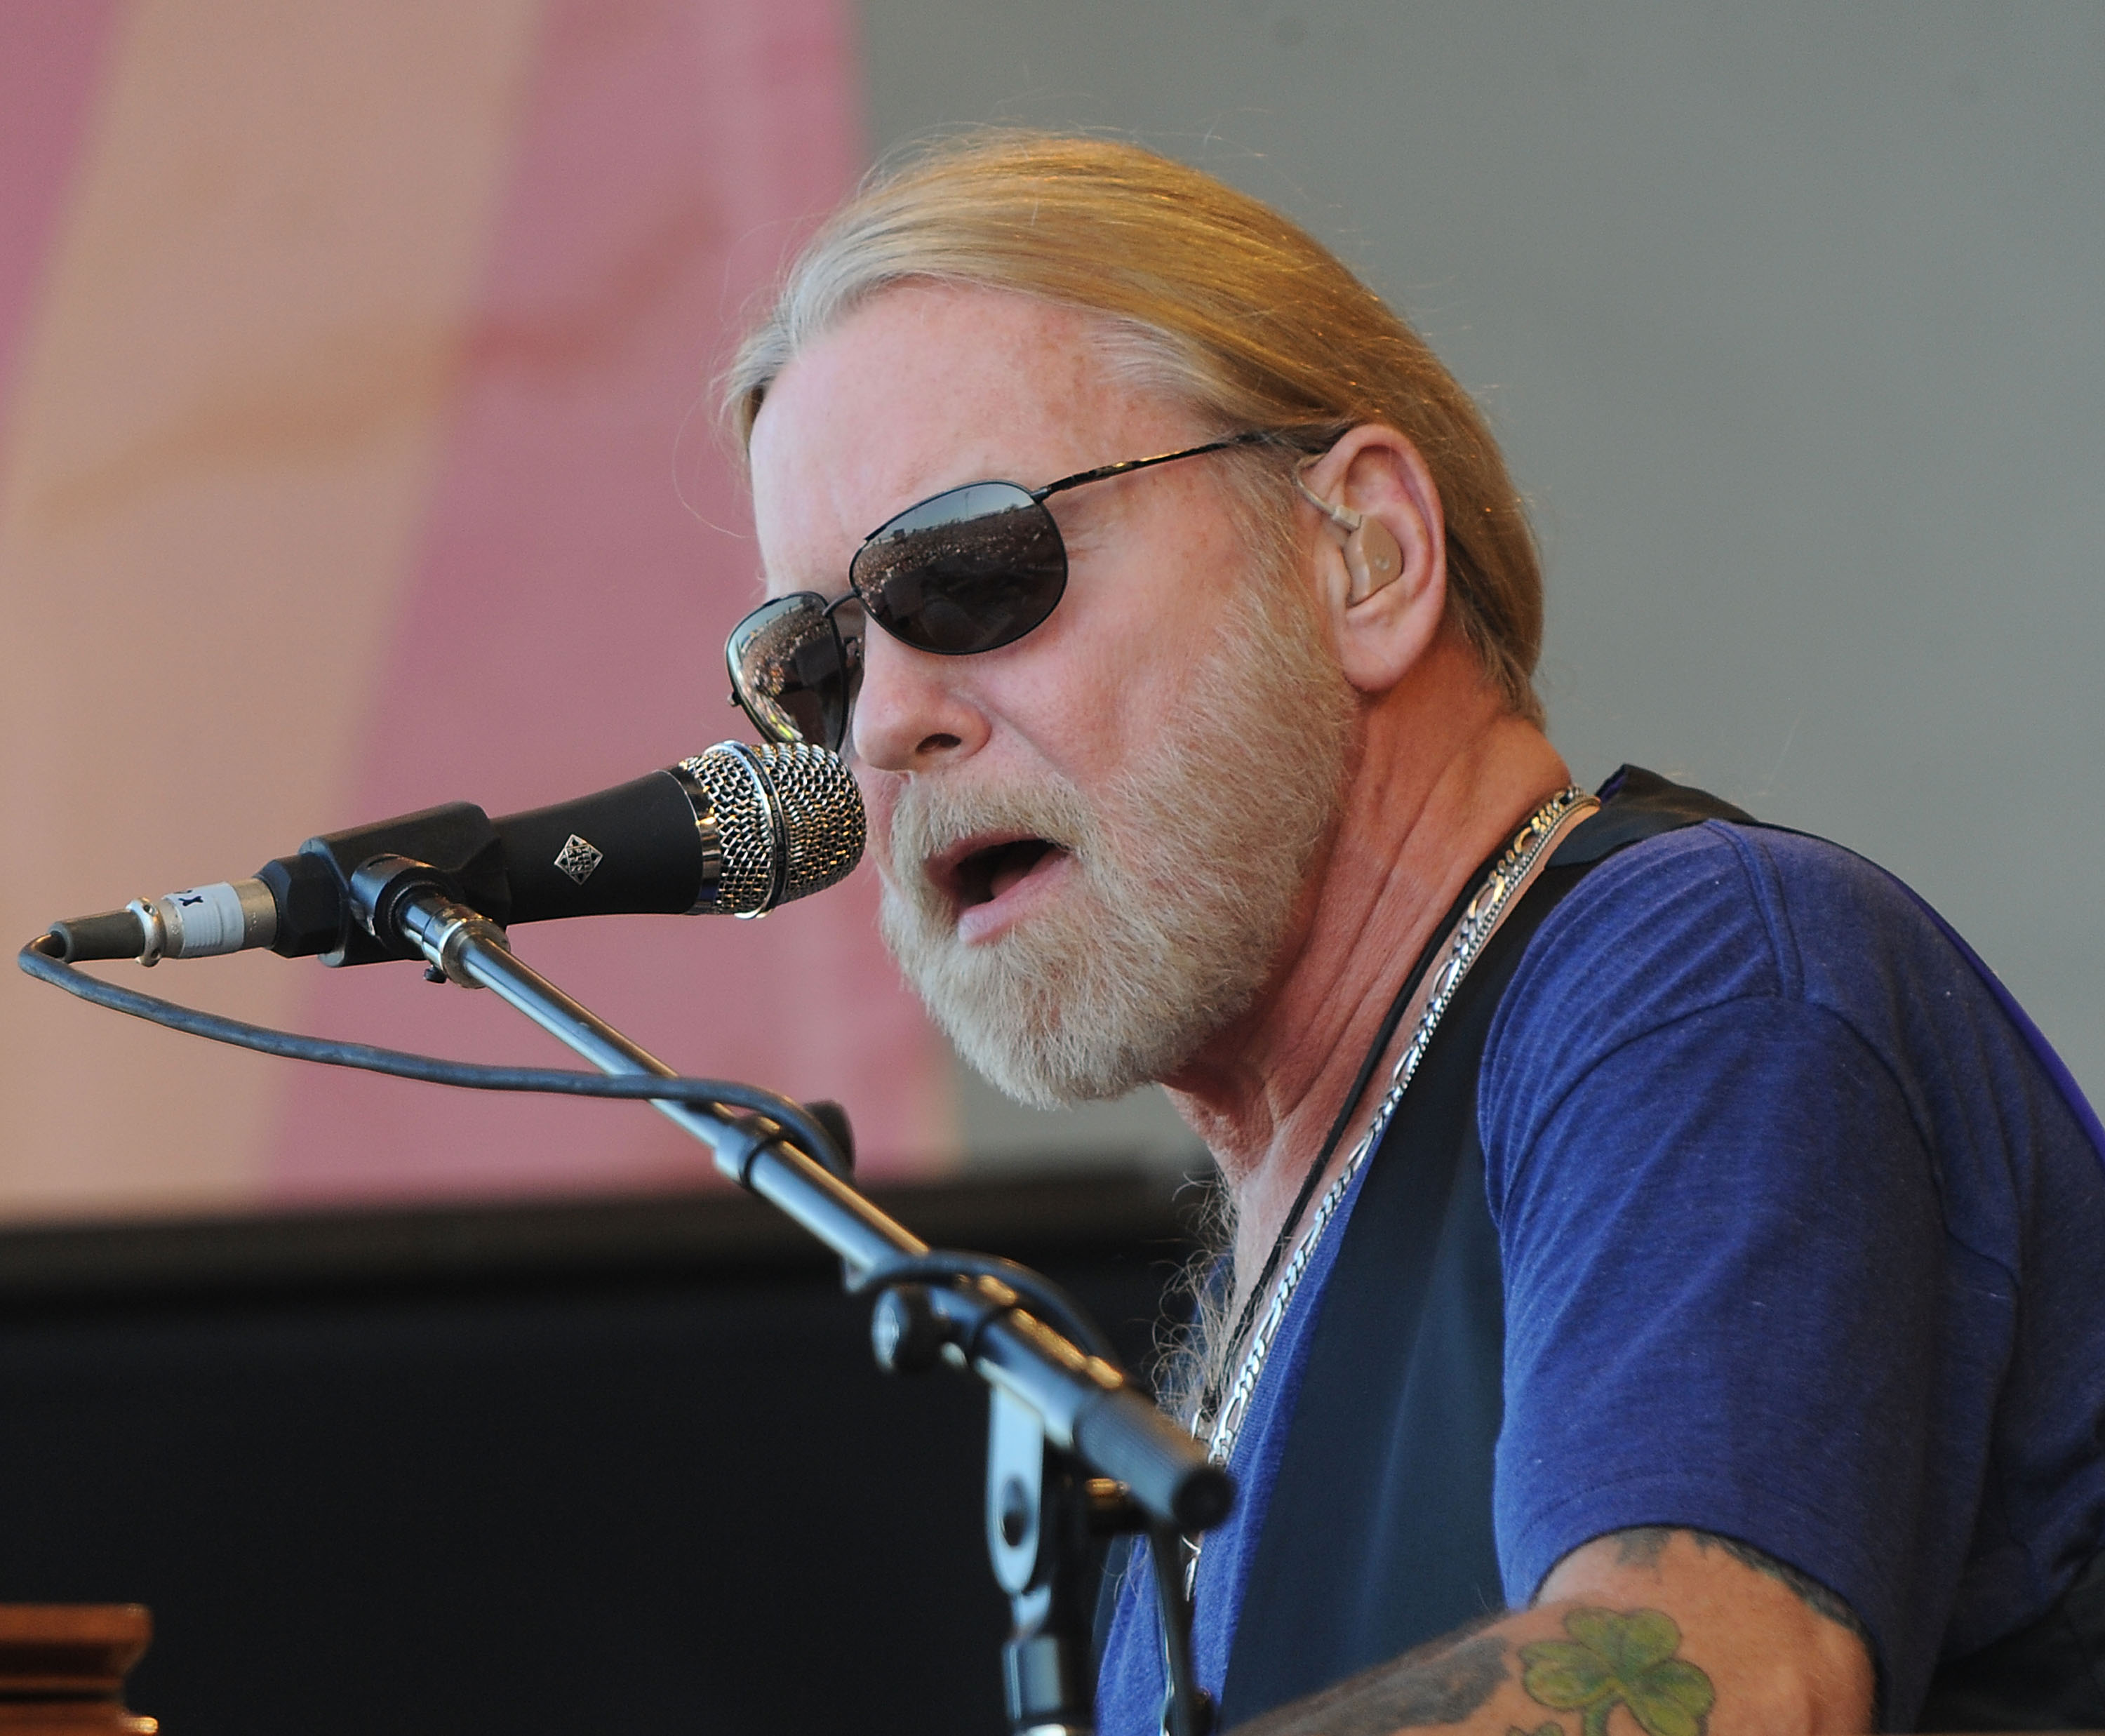 Greg Allman performing at the 41st Annual New Orleans Jazz & Heritage Festival on April 25, 2010, in New Orleans, Louisiana. | Source: Getty Images